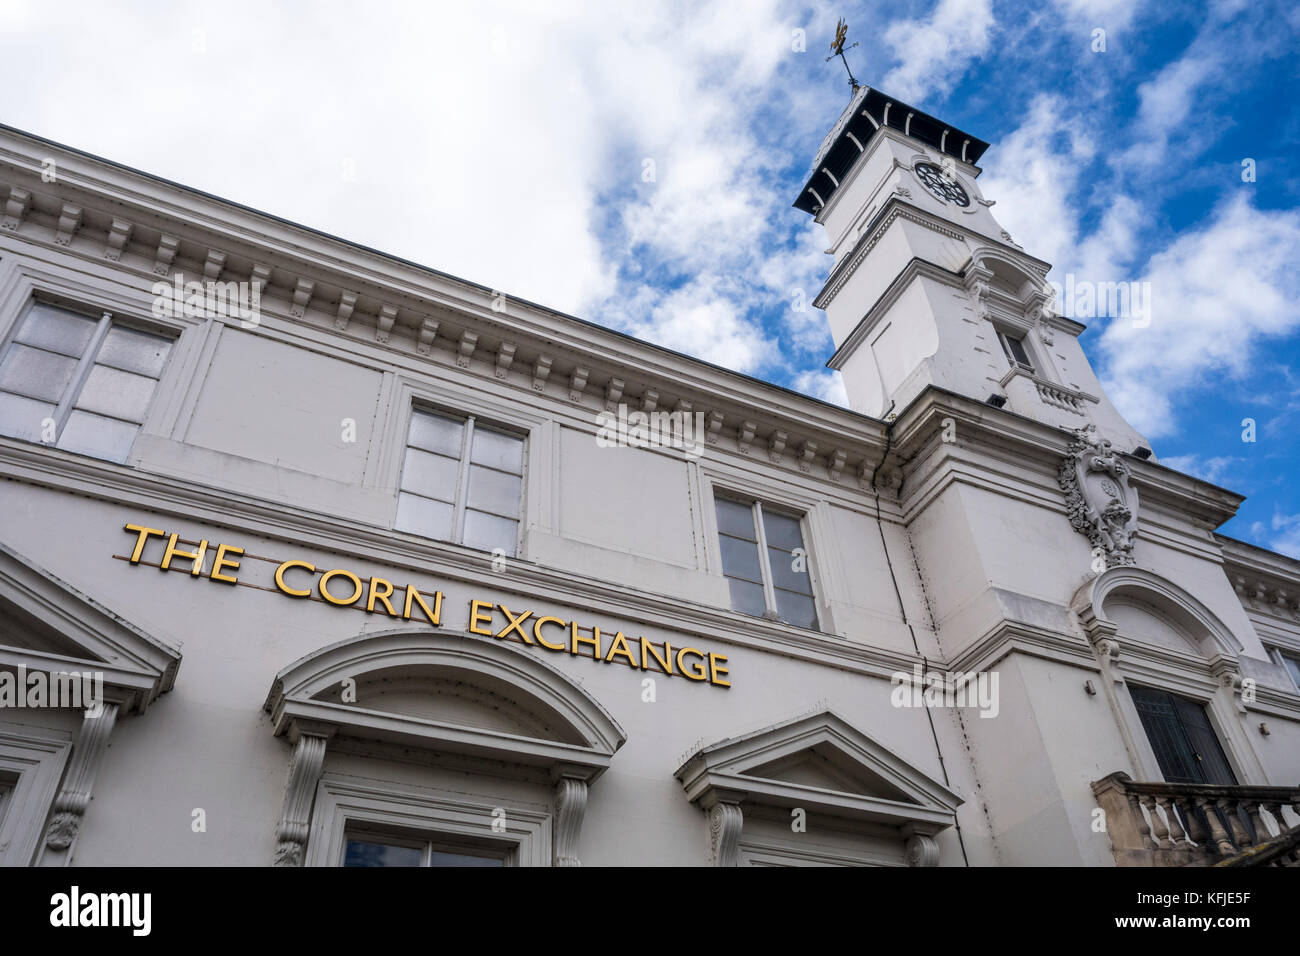 The Corn Exchange building, Leicester, Leicestershire, East Midlands, UK Stock Photo